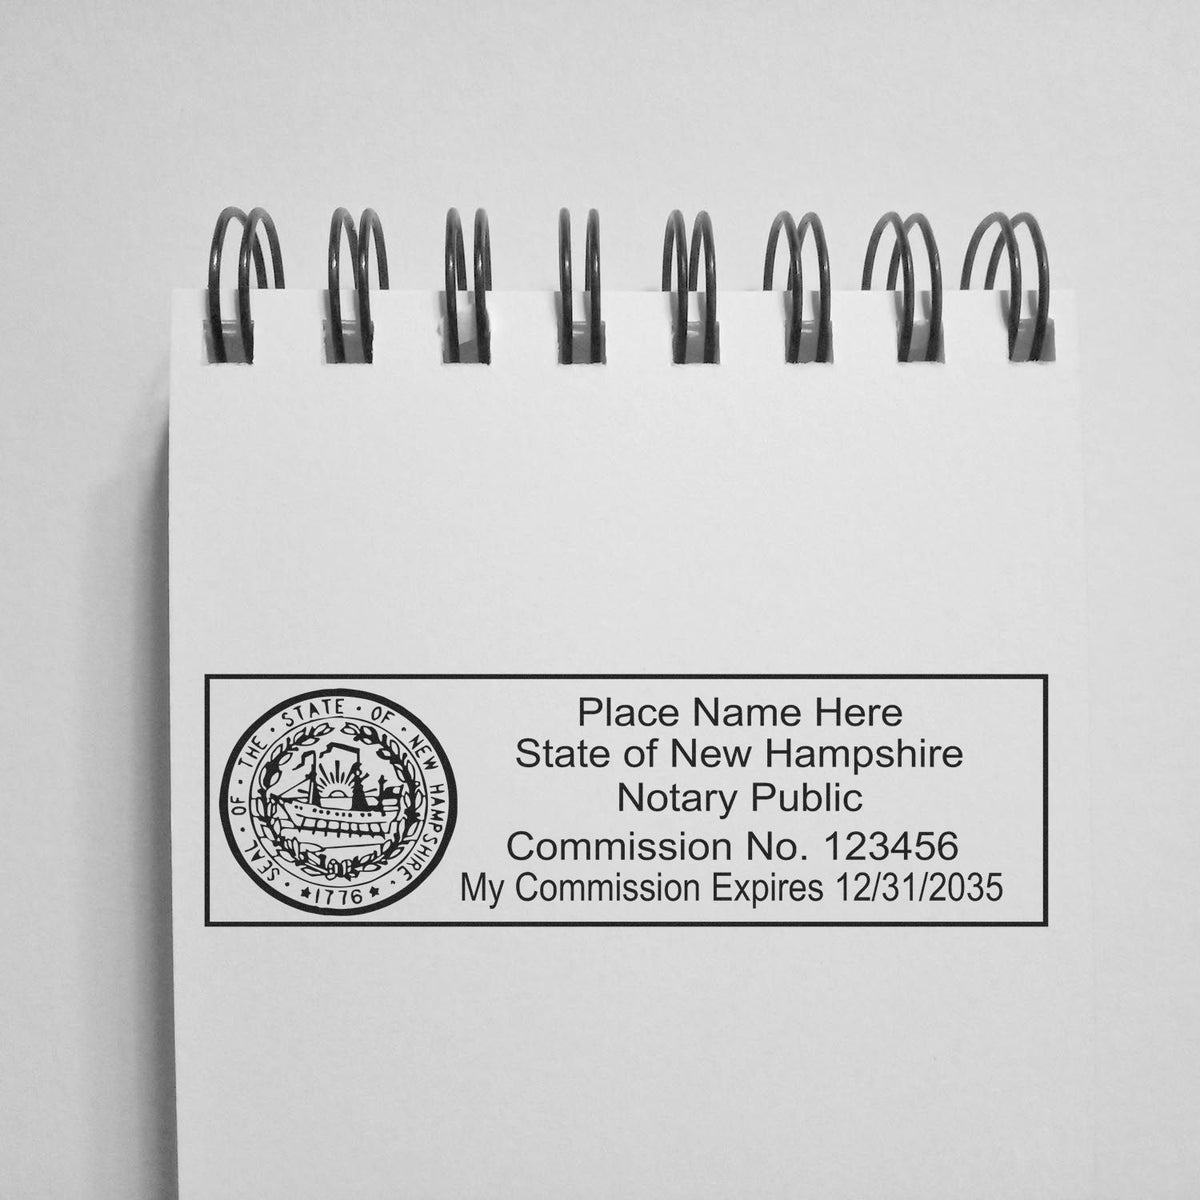 PSI New Hampshire Notary Stamp in use photo showing a stamped imprint of the PSI New Hampshire Notary Stamp